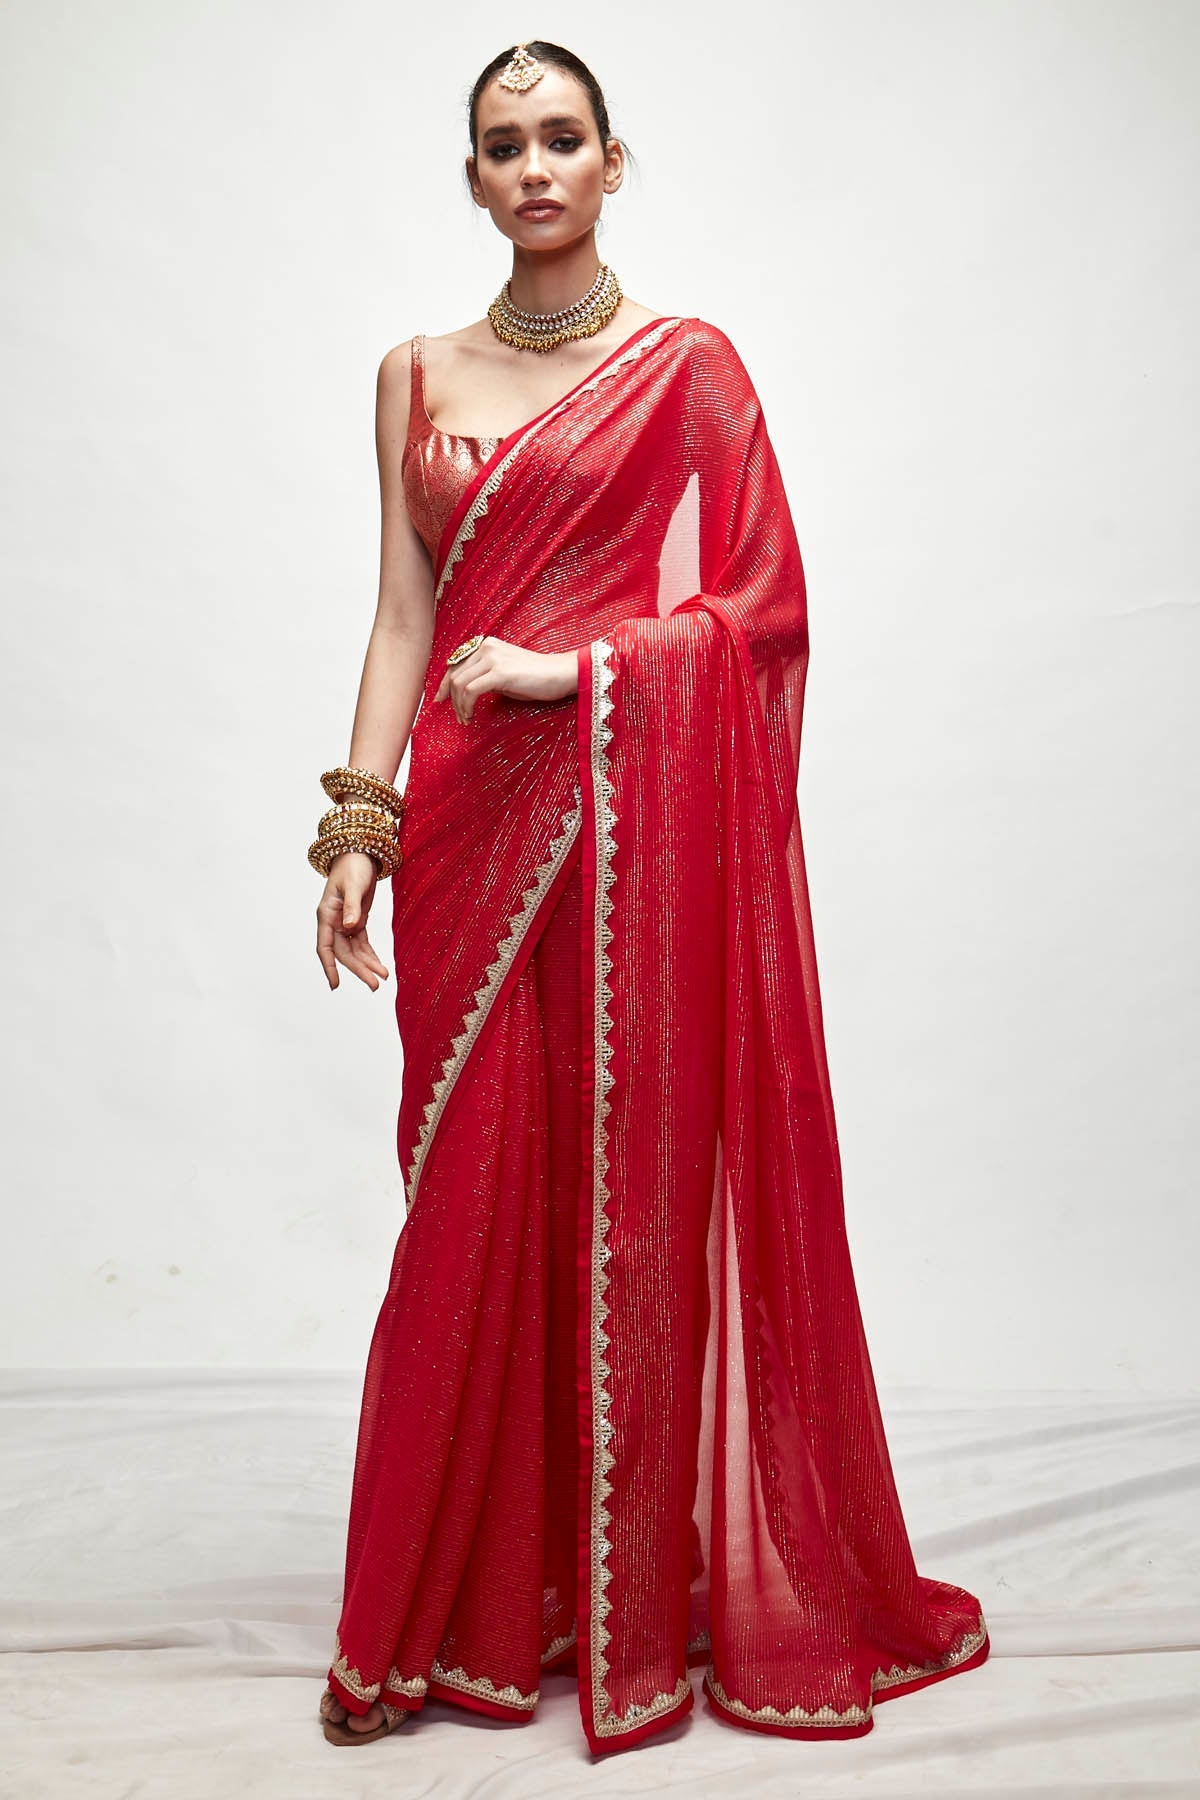 Designer Ranian Carmine red silk georgette saree with self woven gold and silver metallic threads, gota and silk satin paired with silk brocade champagne matt zari blouse For Women Online at ScrollnShops